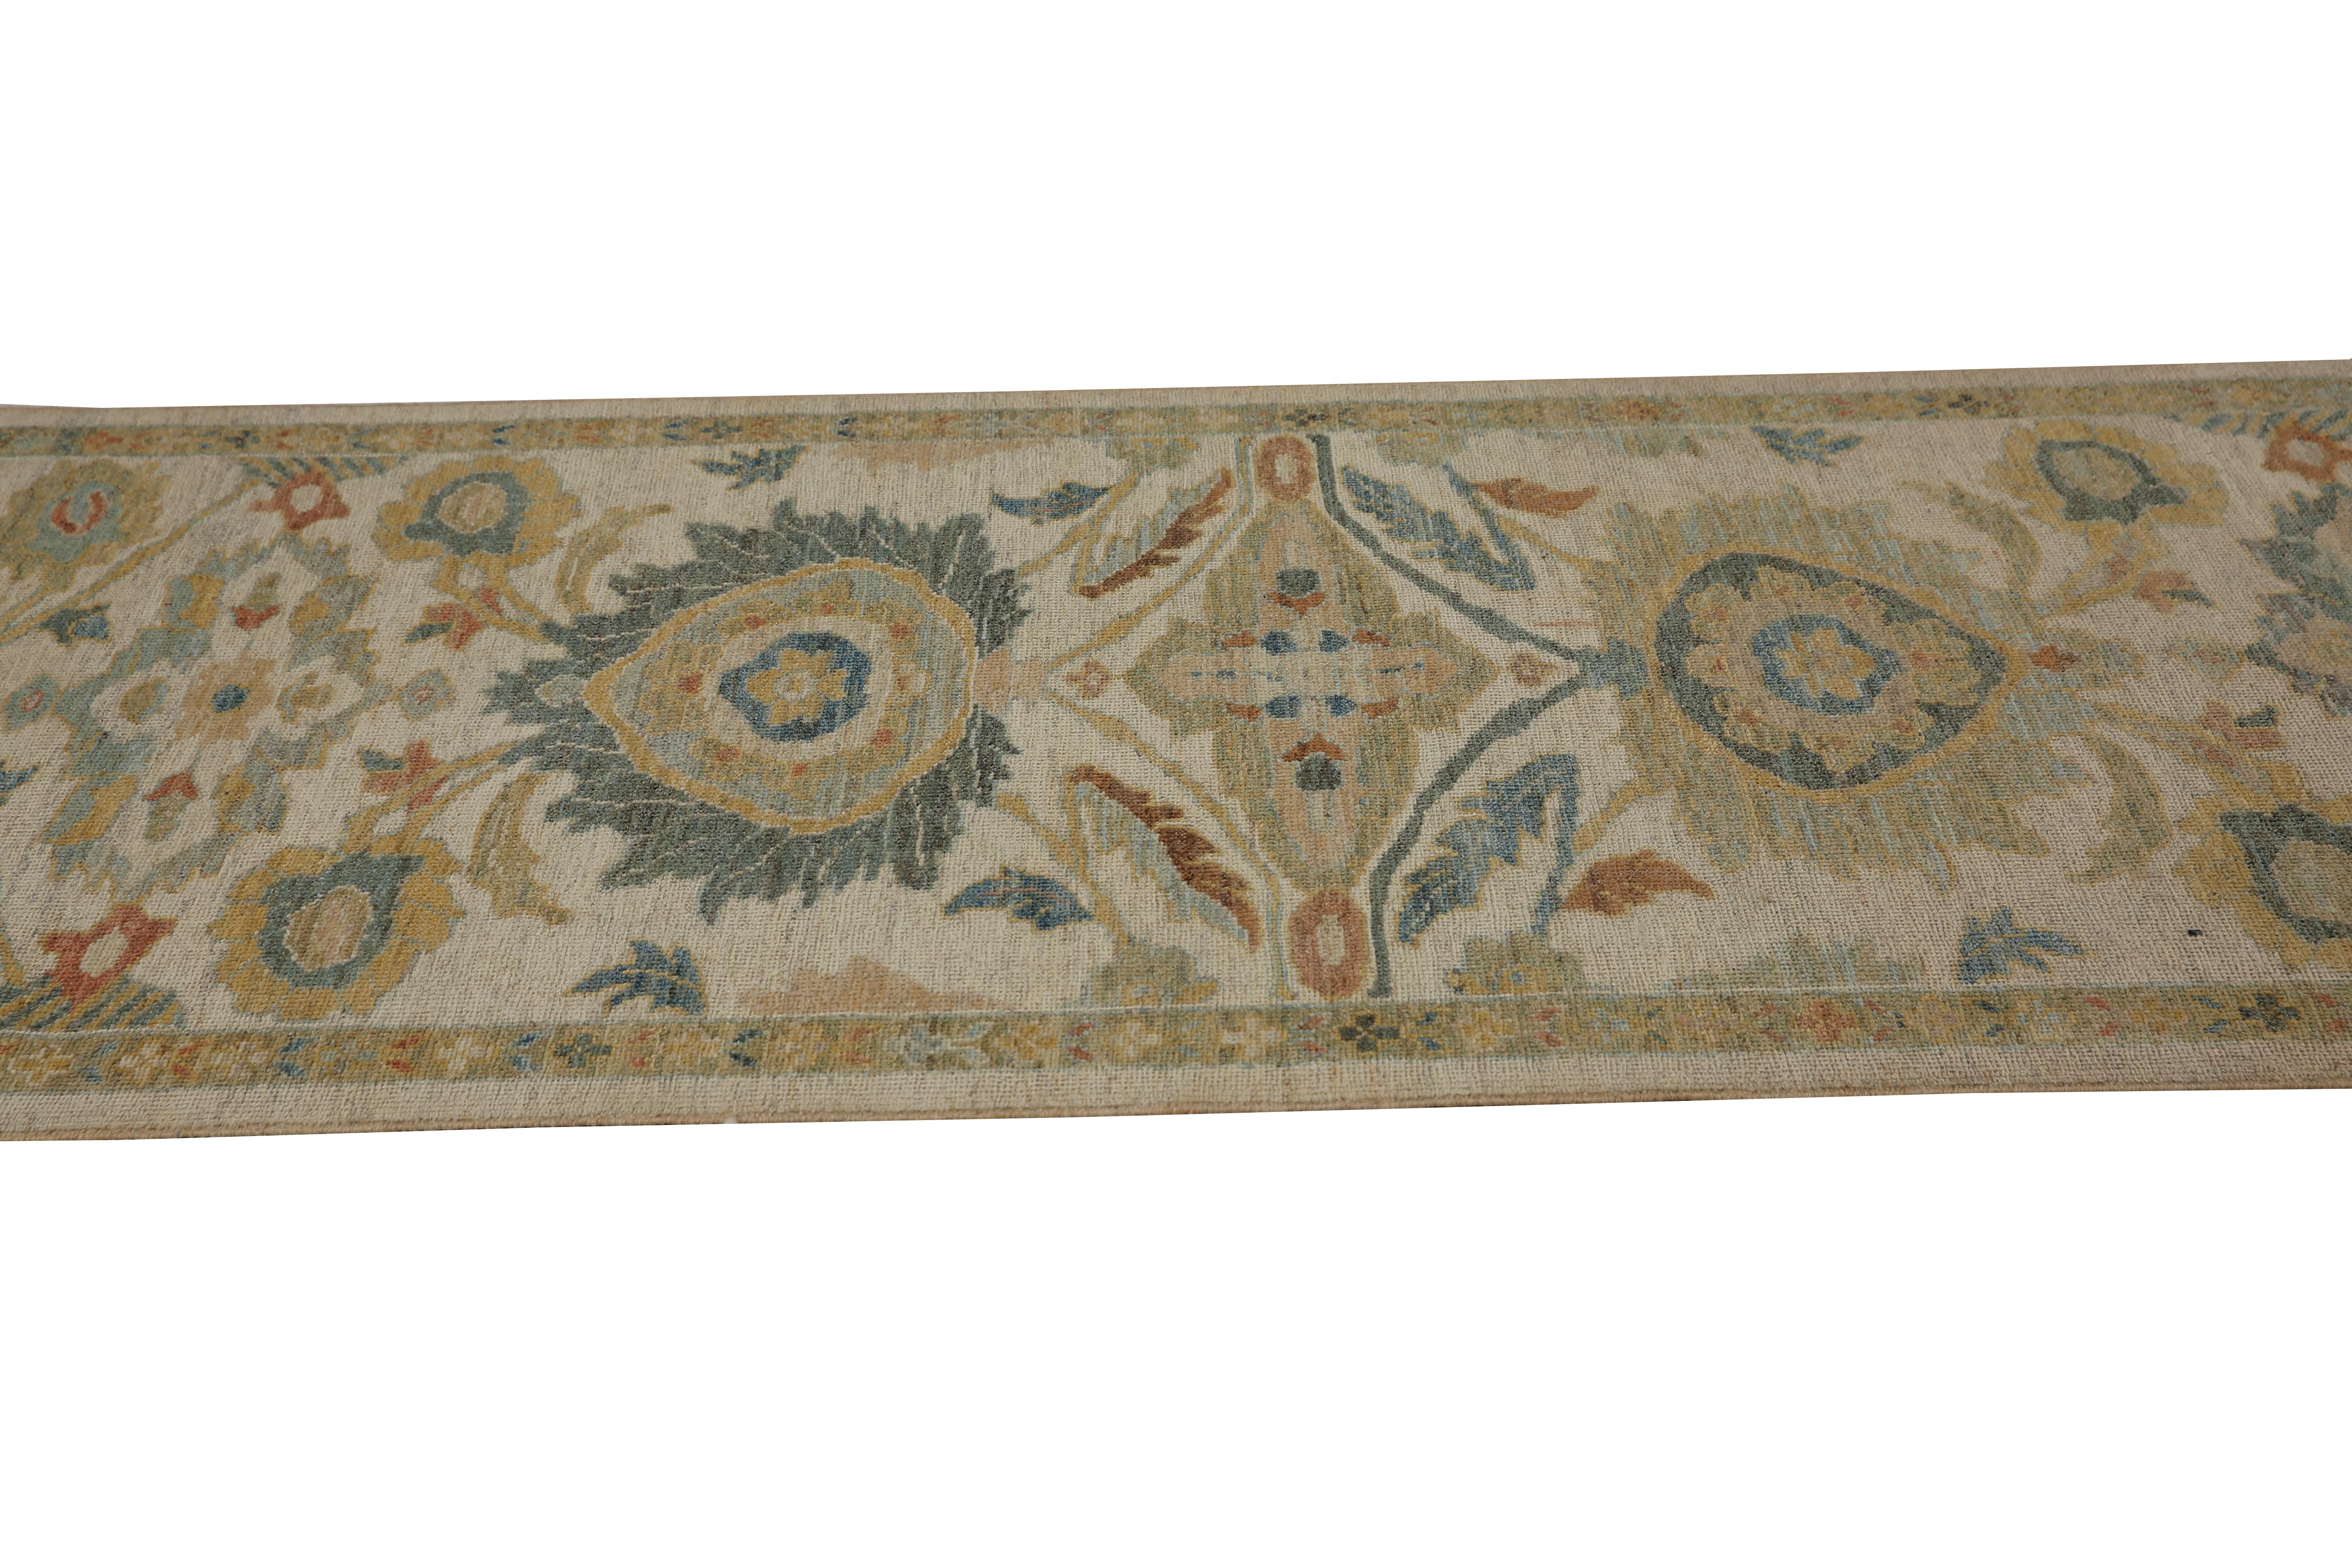 Contemporary Luxurious Handmade Sultanabad Rug - Transitional Design, Blue, Orange, Green, Re For Sale